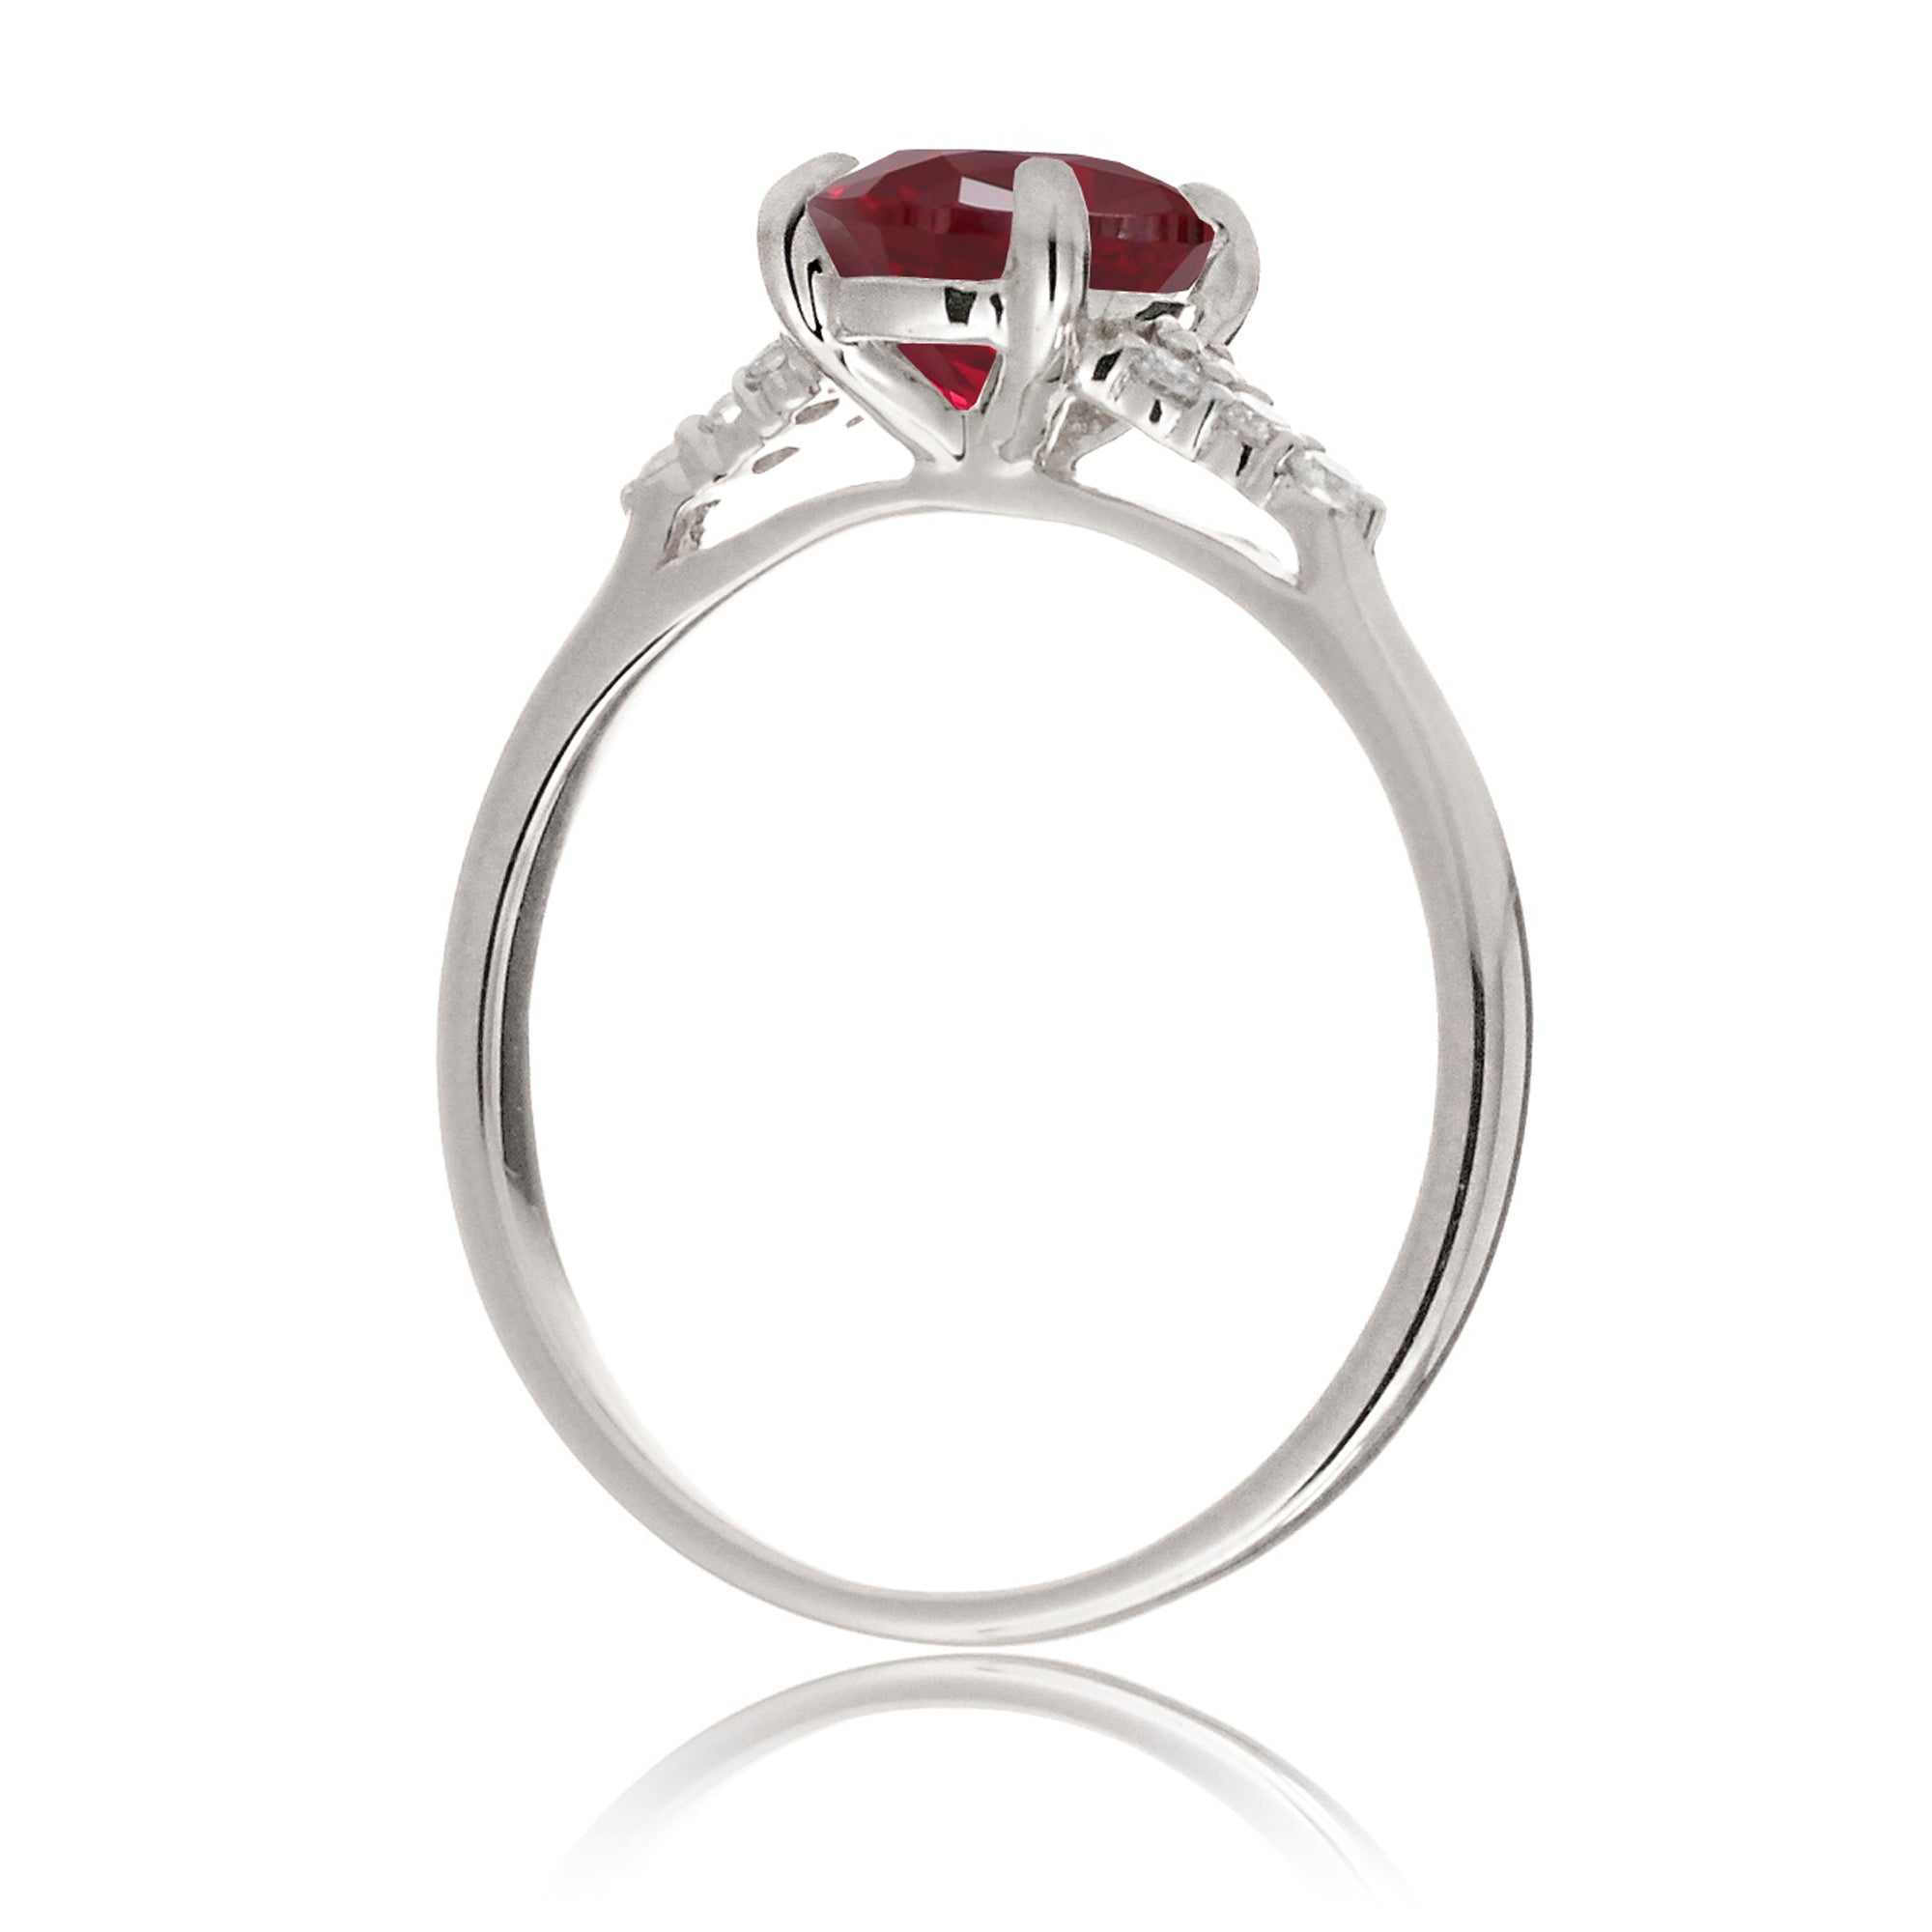 Pear cut ruby and diamond engagement ring in white gold - the Chloe lab-grown